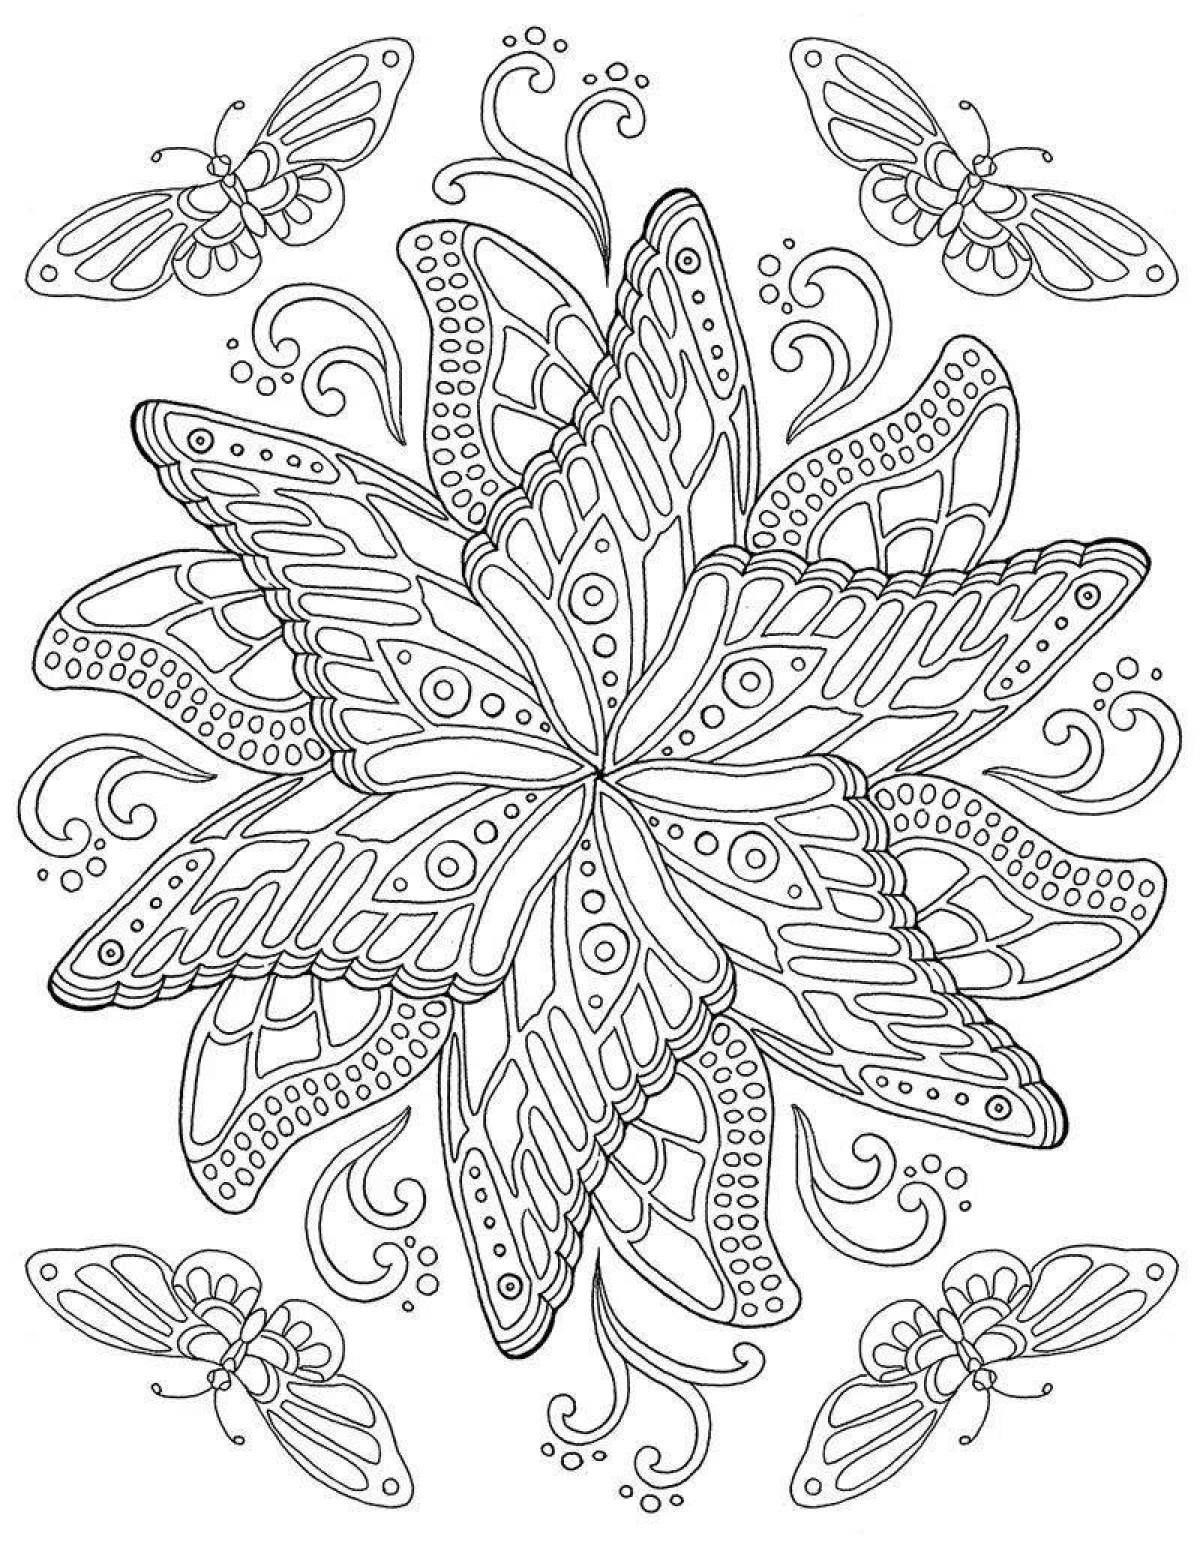 Amazing coloring book for coloring